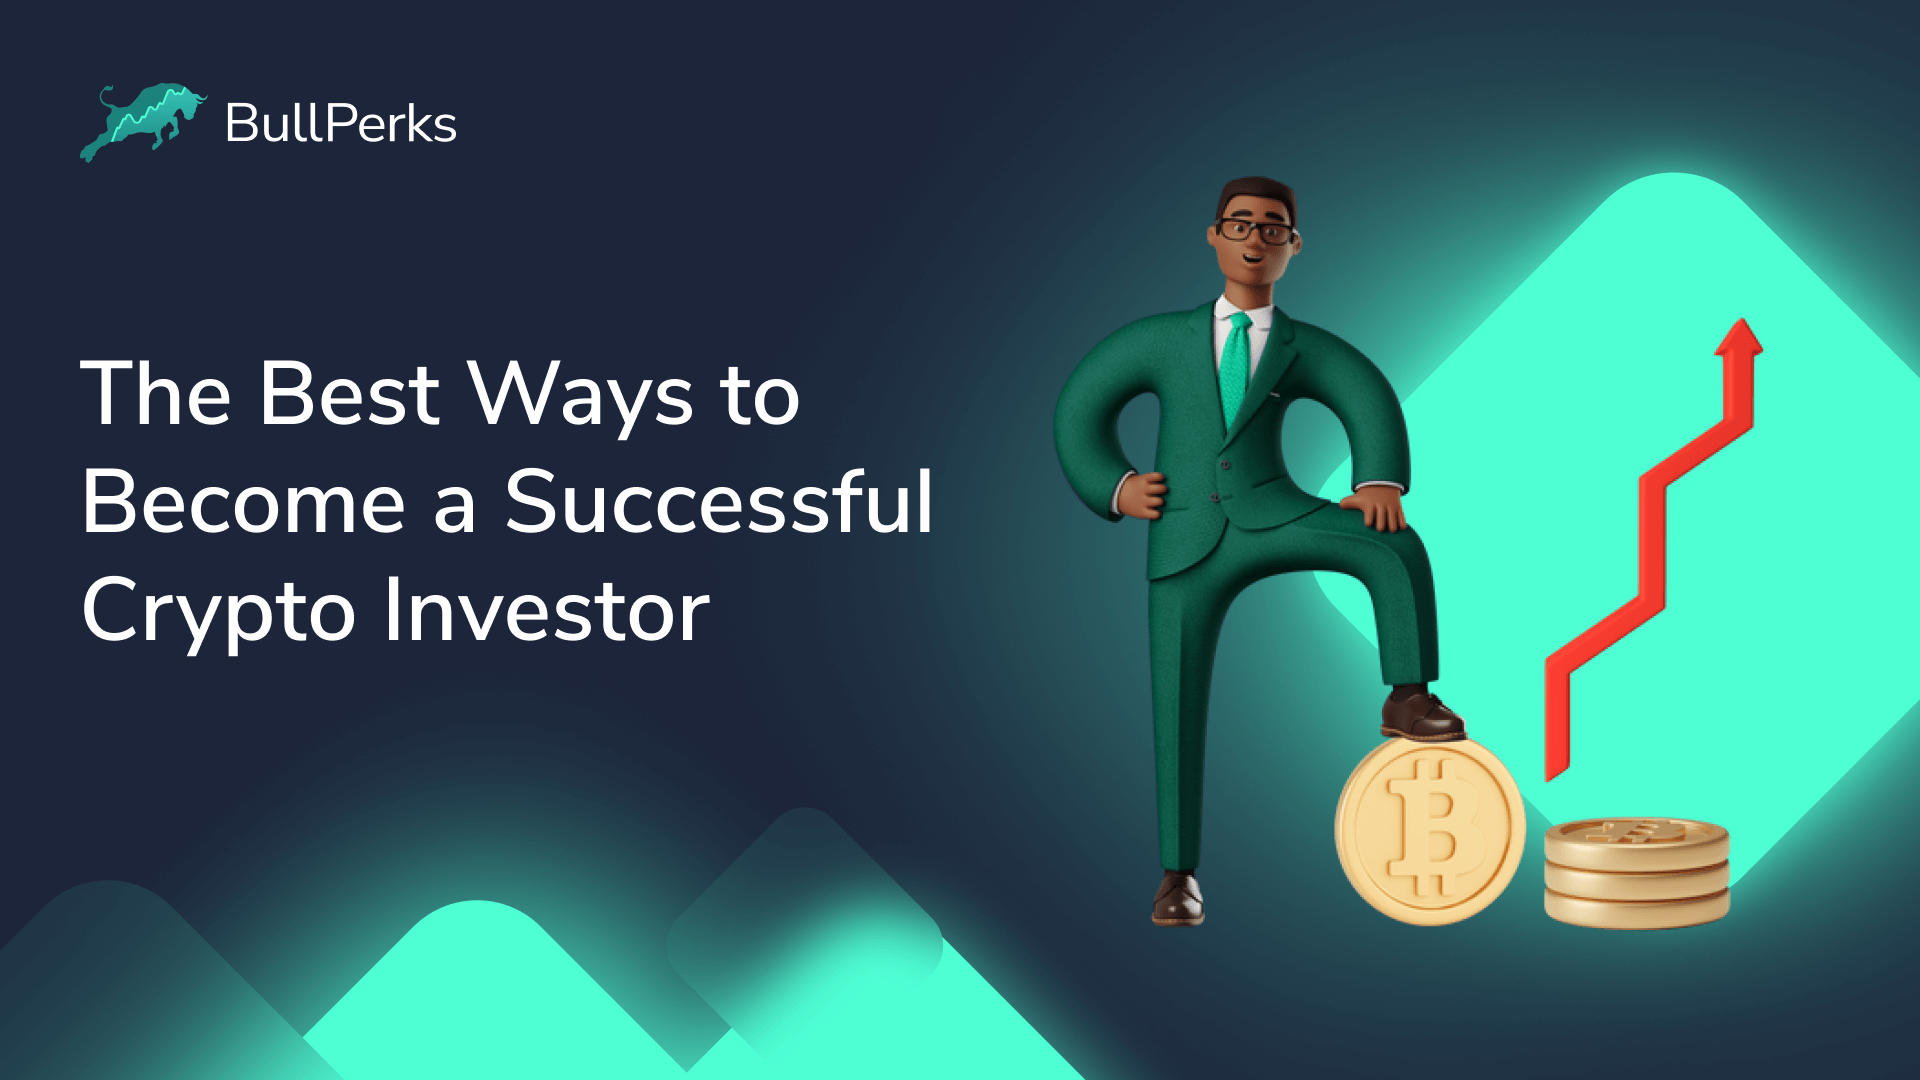 The Best Ways to Become a Successful Crypto Investor 1 BullPerks